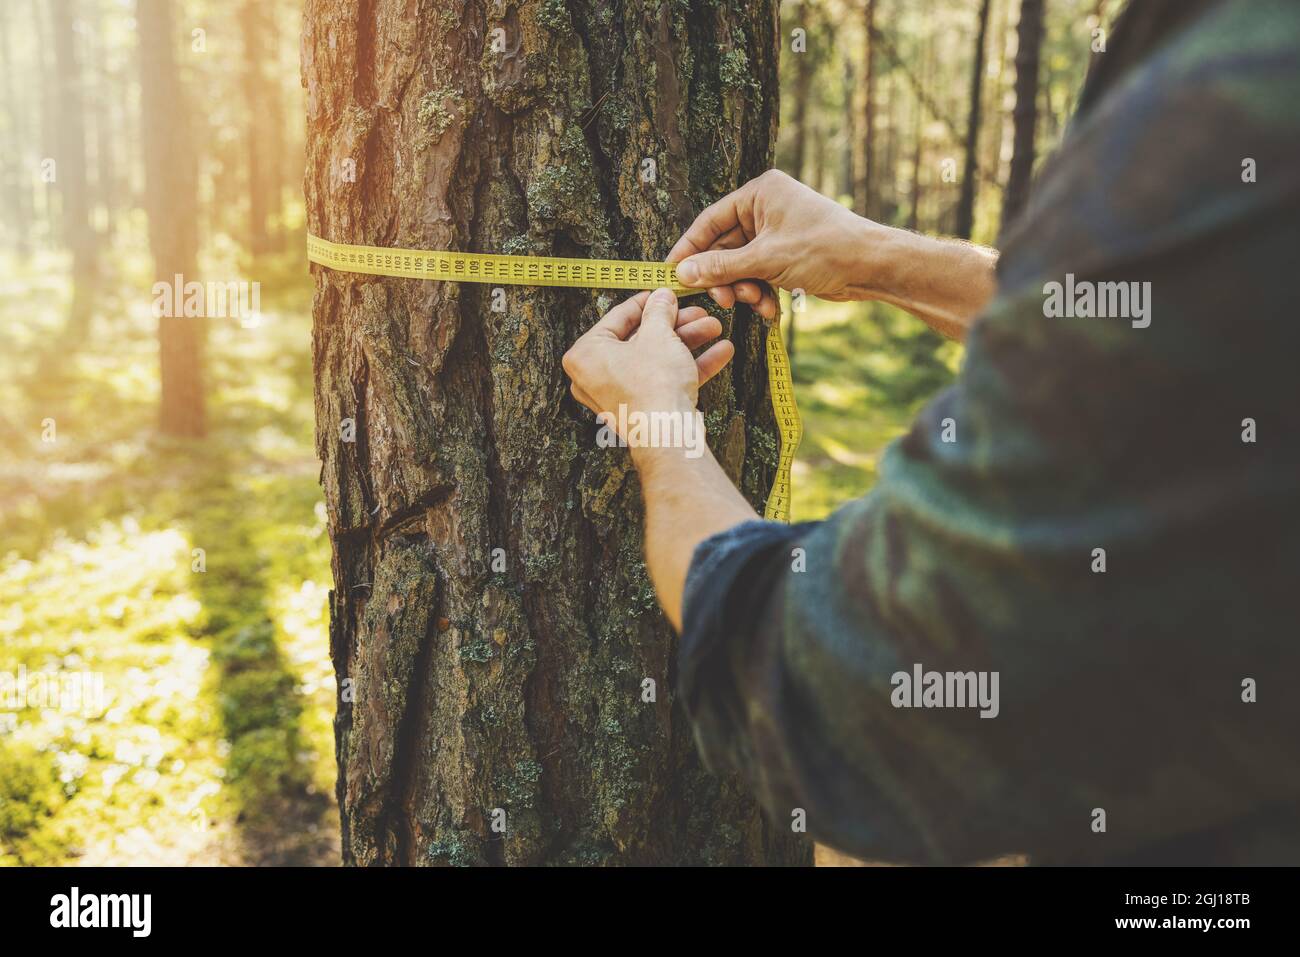 deforestation and forest valuation - man measuring the circumference of a tree with a ruler tape Stock Photo